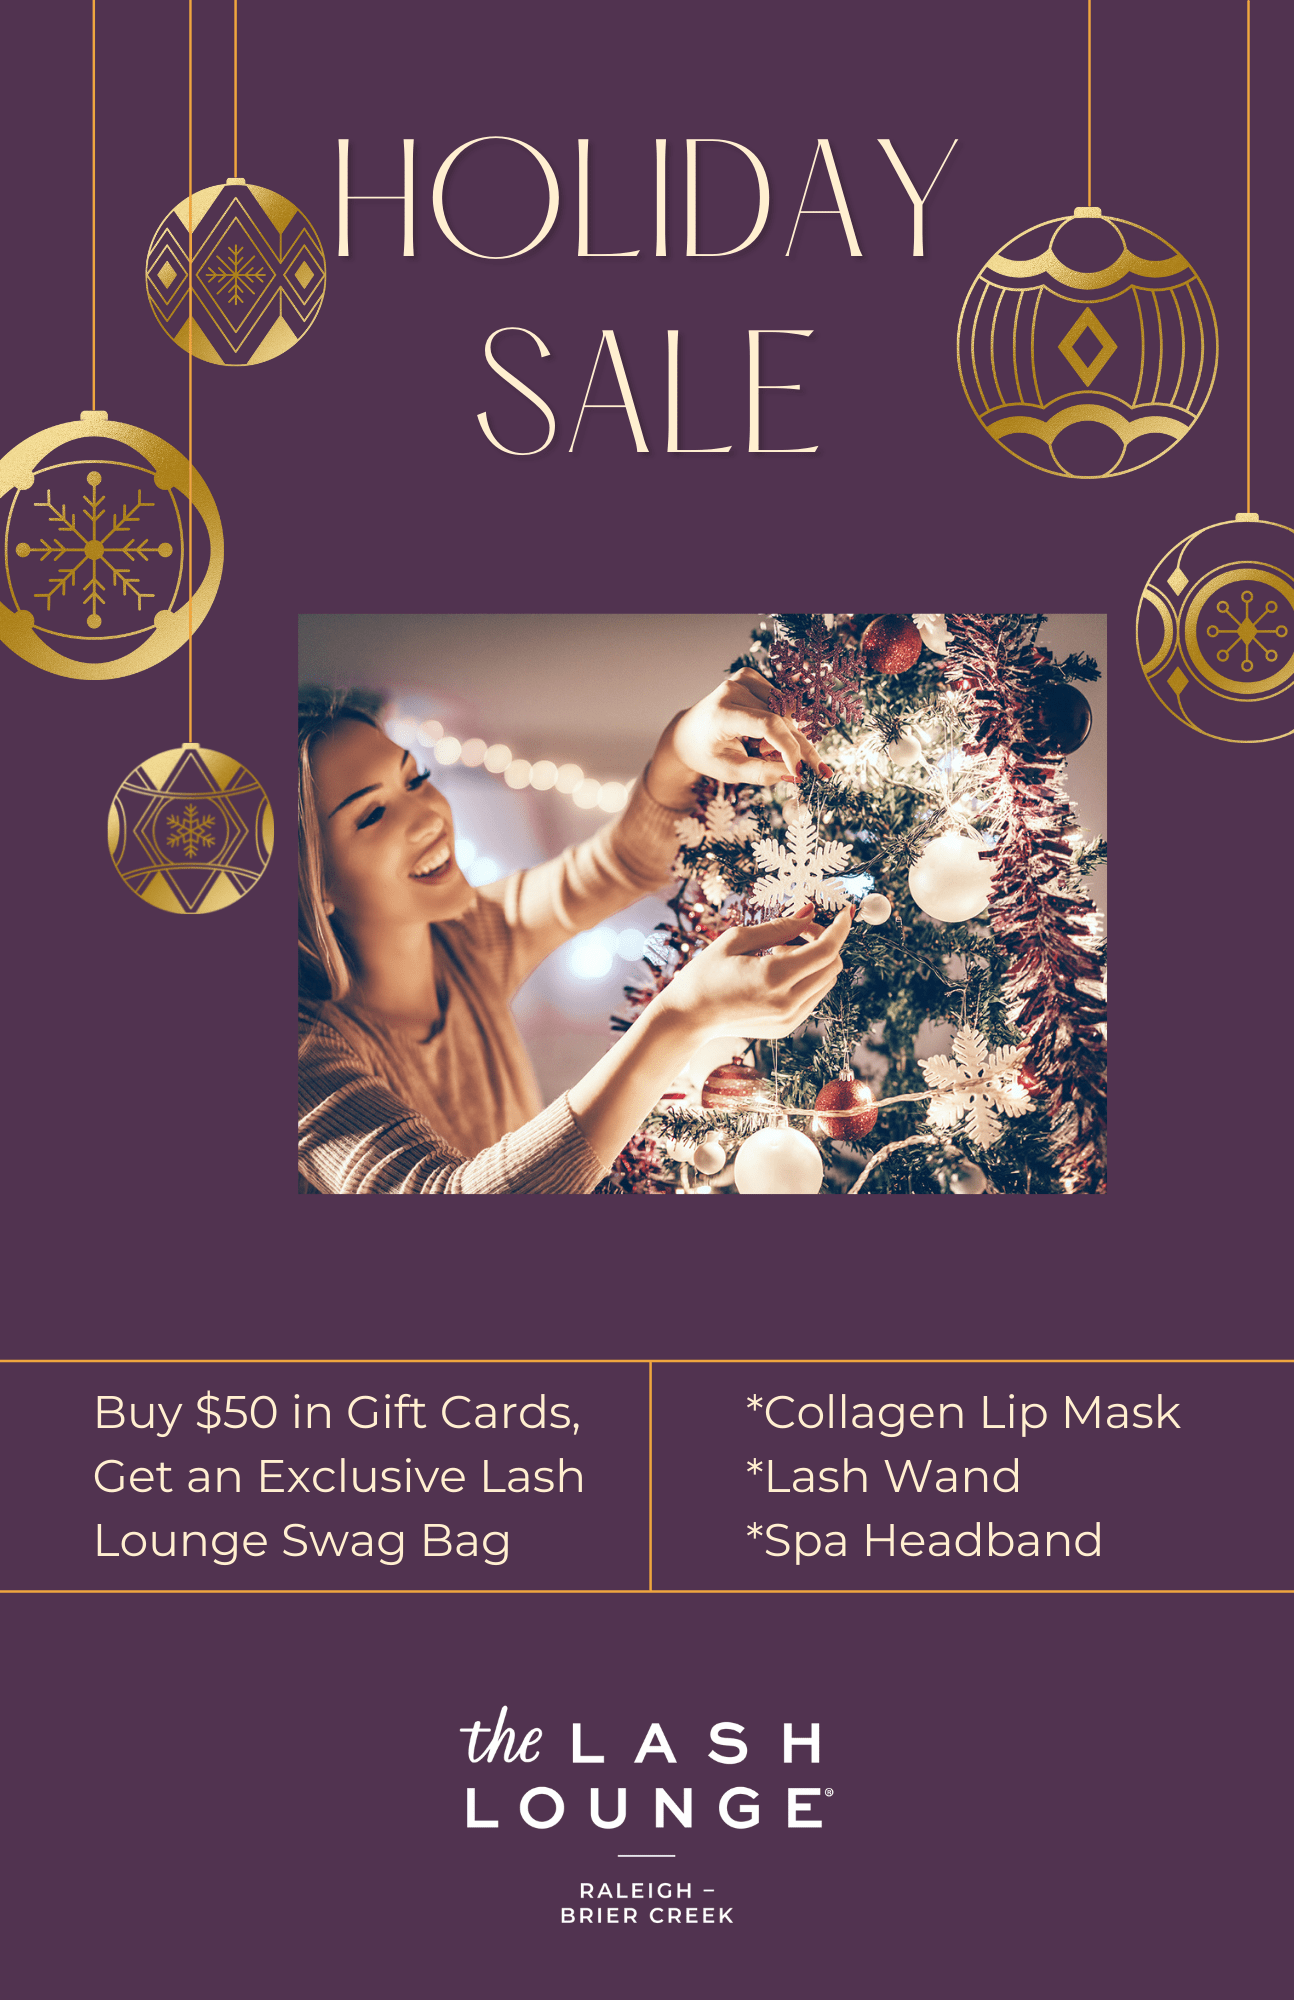 The Lash Lounge Brier Creek Holiday Sale